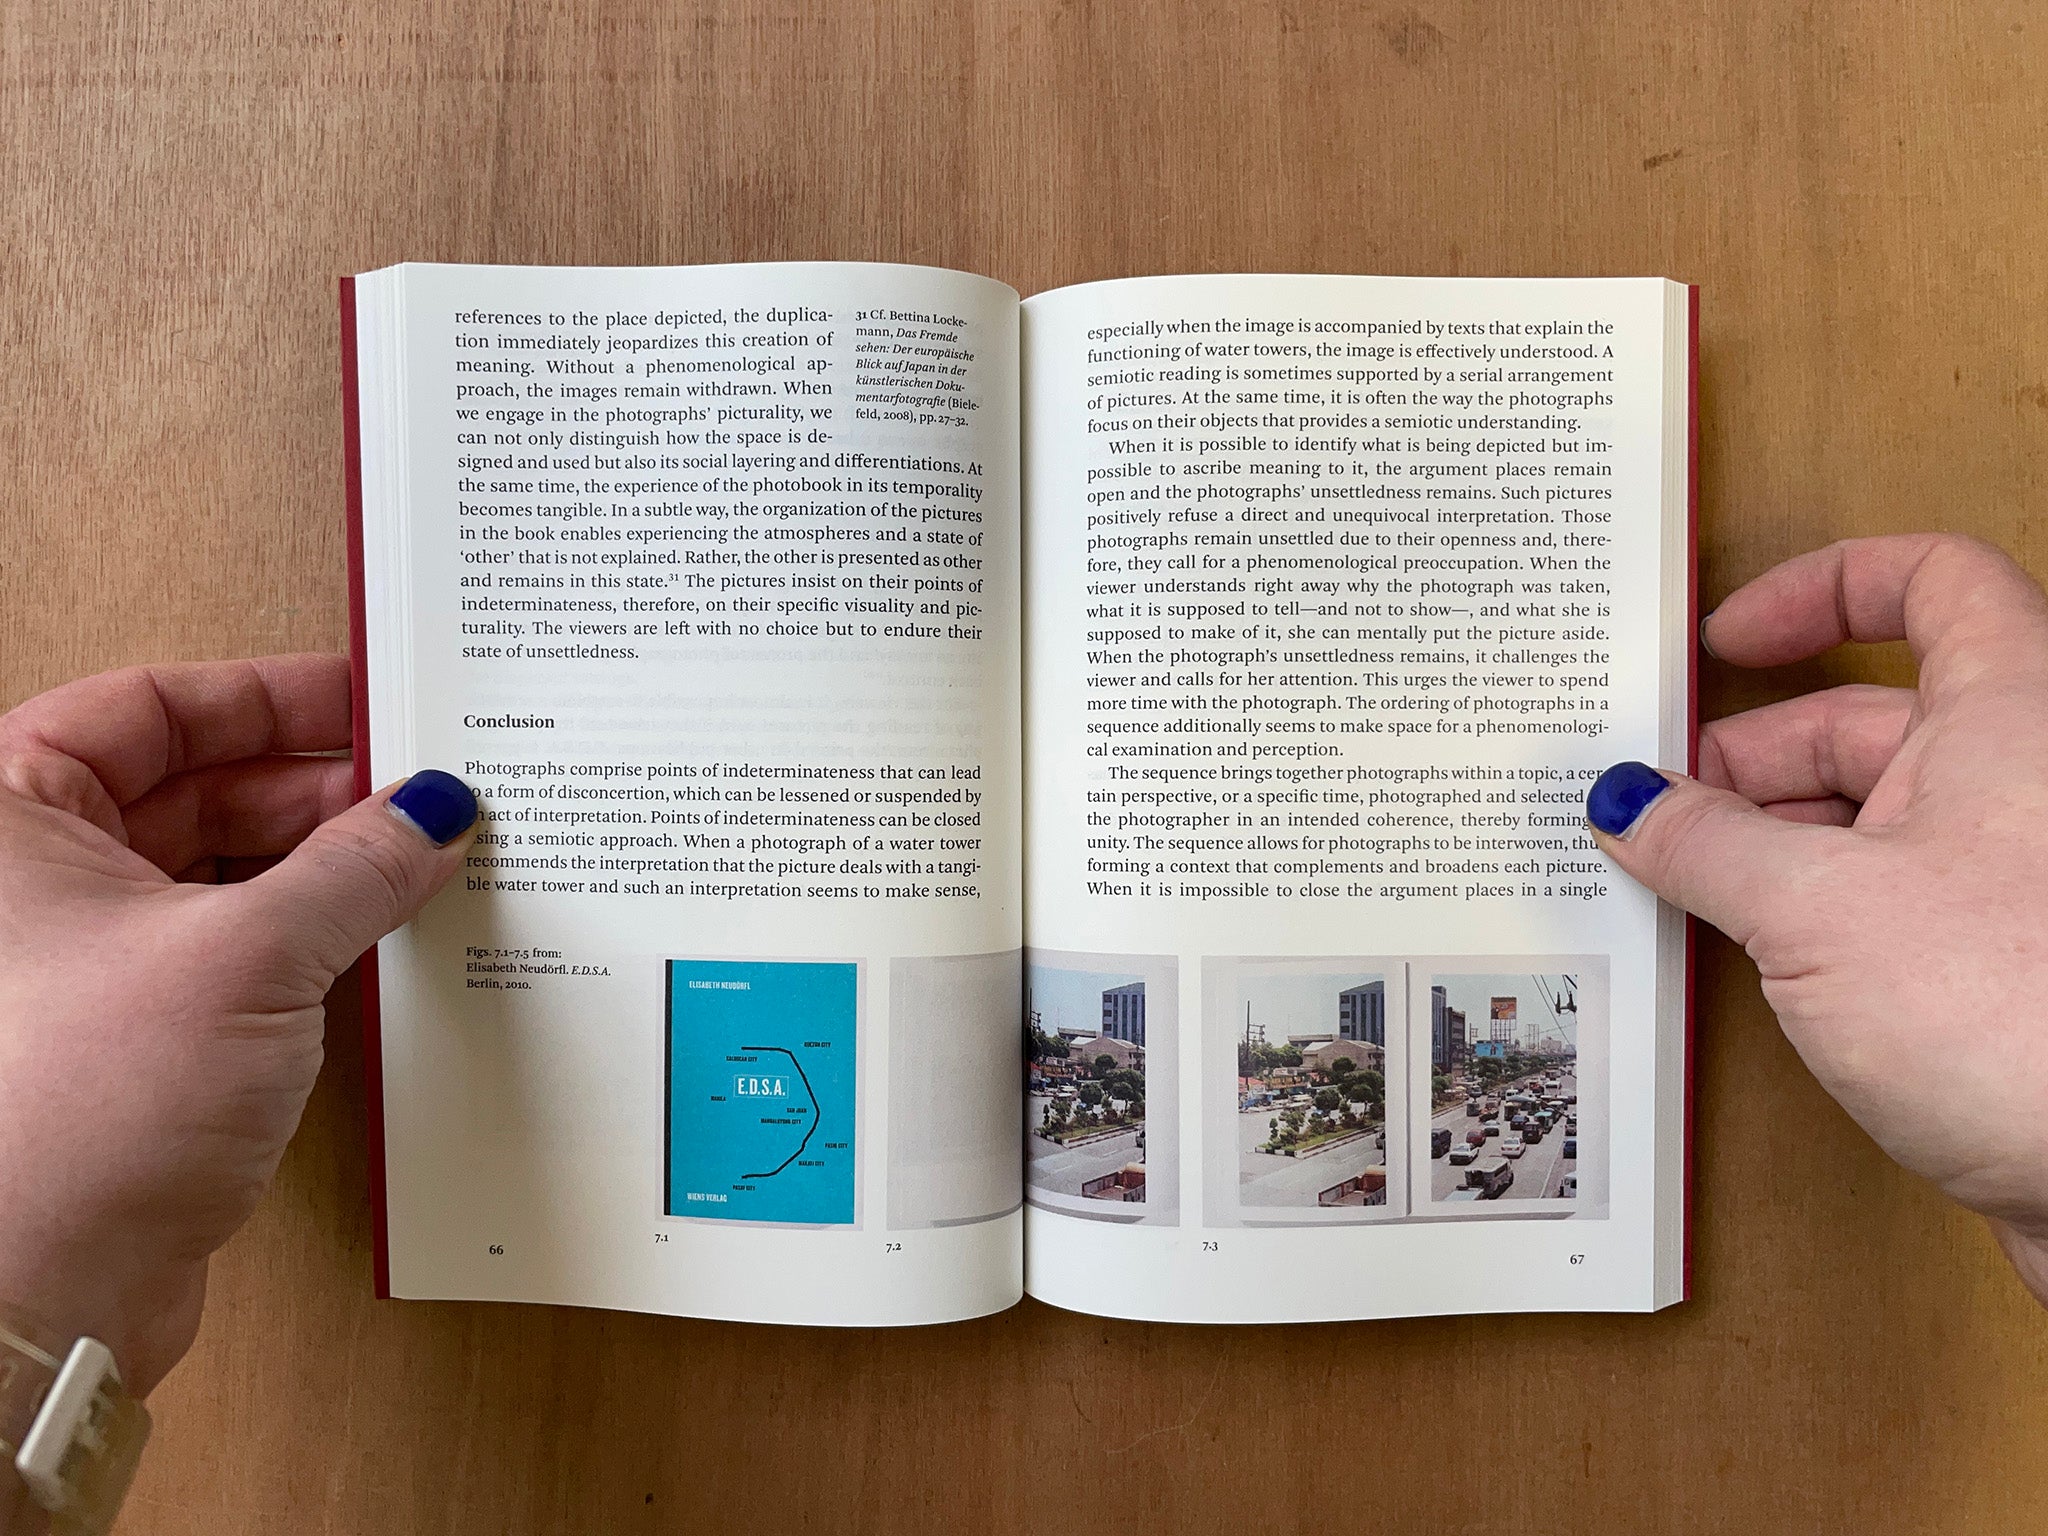 THINKING THE PHOTOBOOK: A PRACTICAL GUIDE by Bettina Lockemann